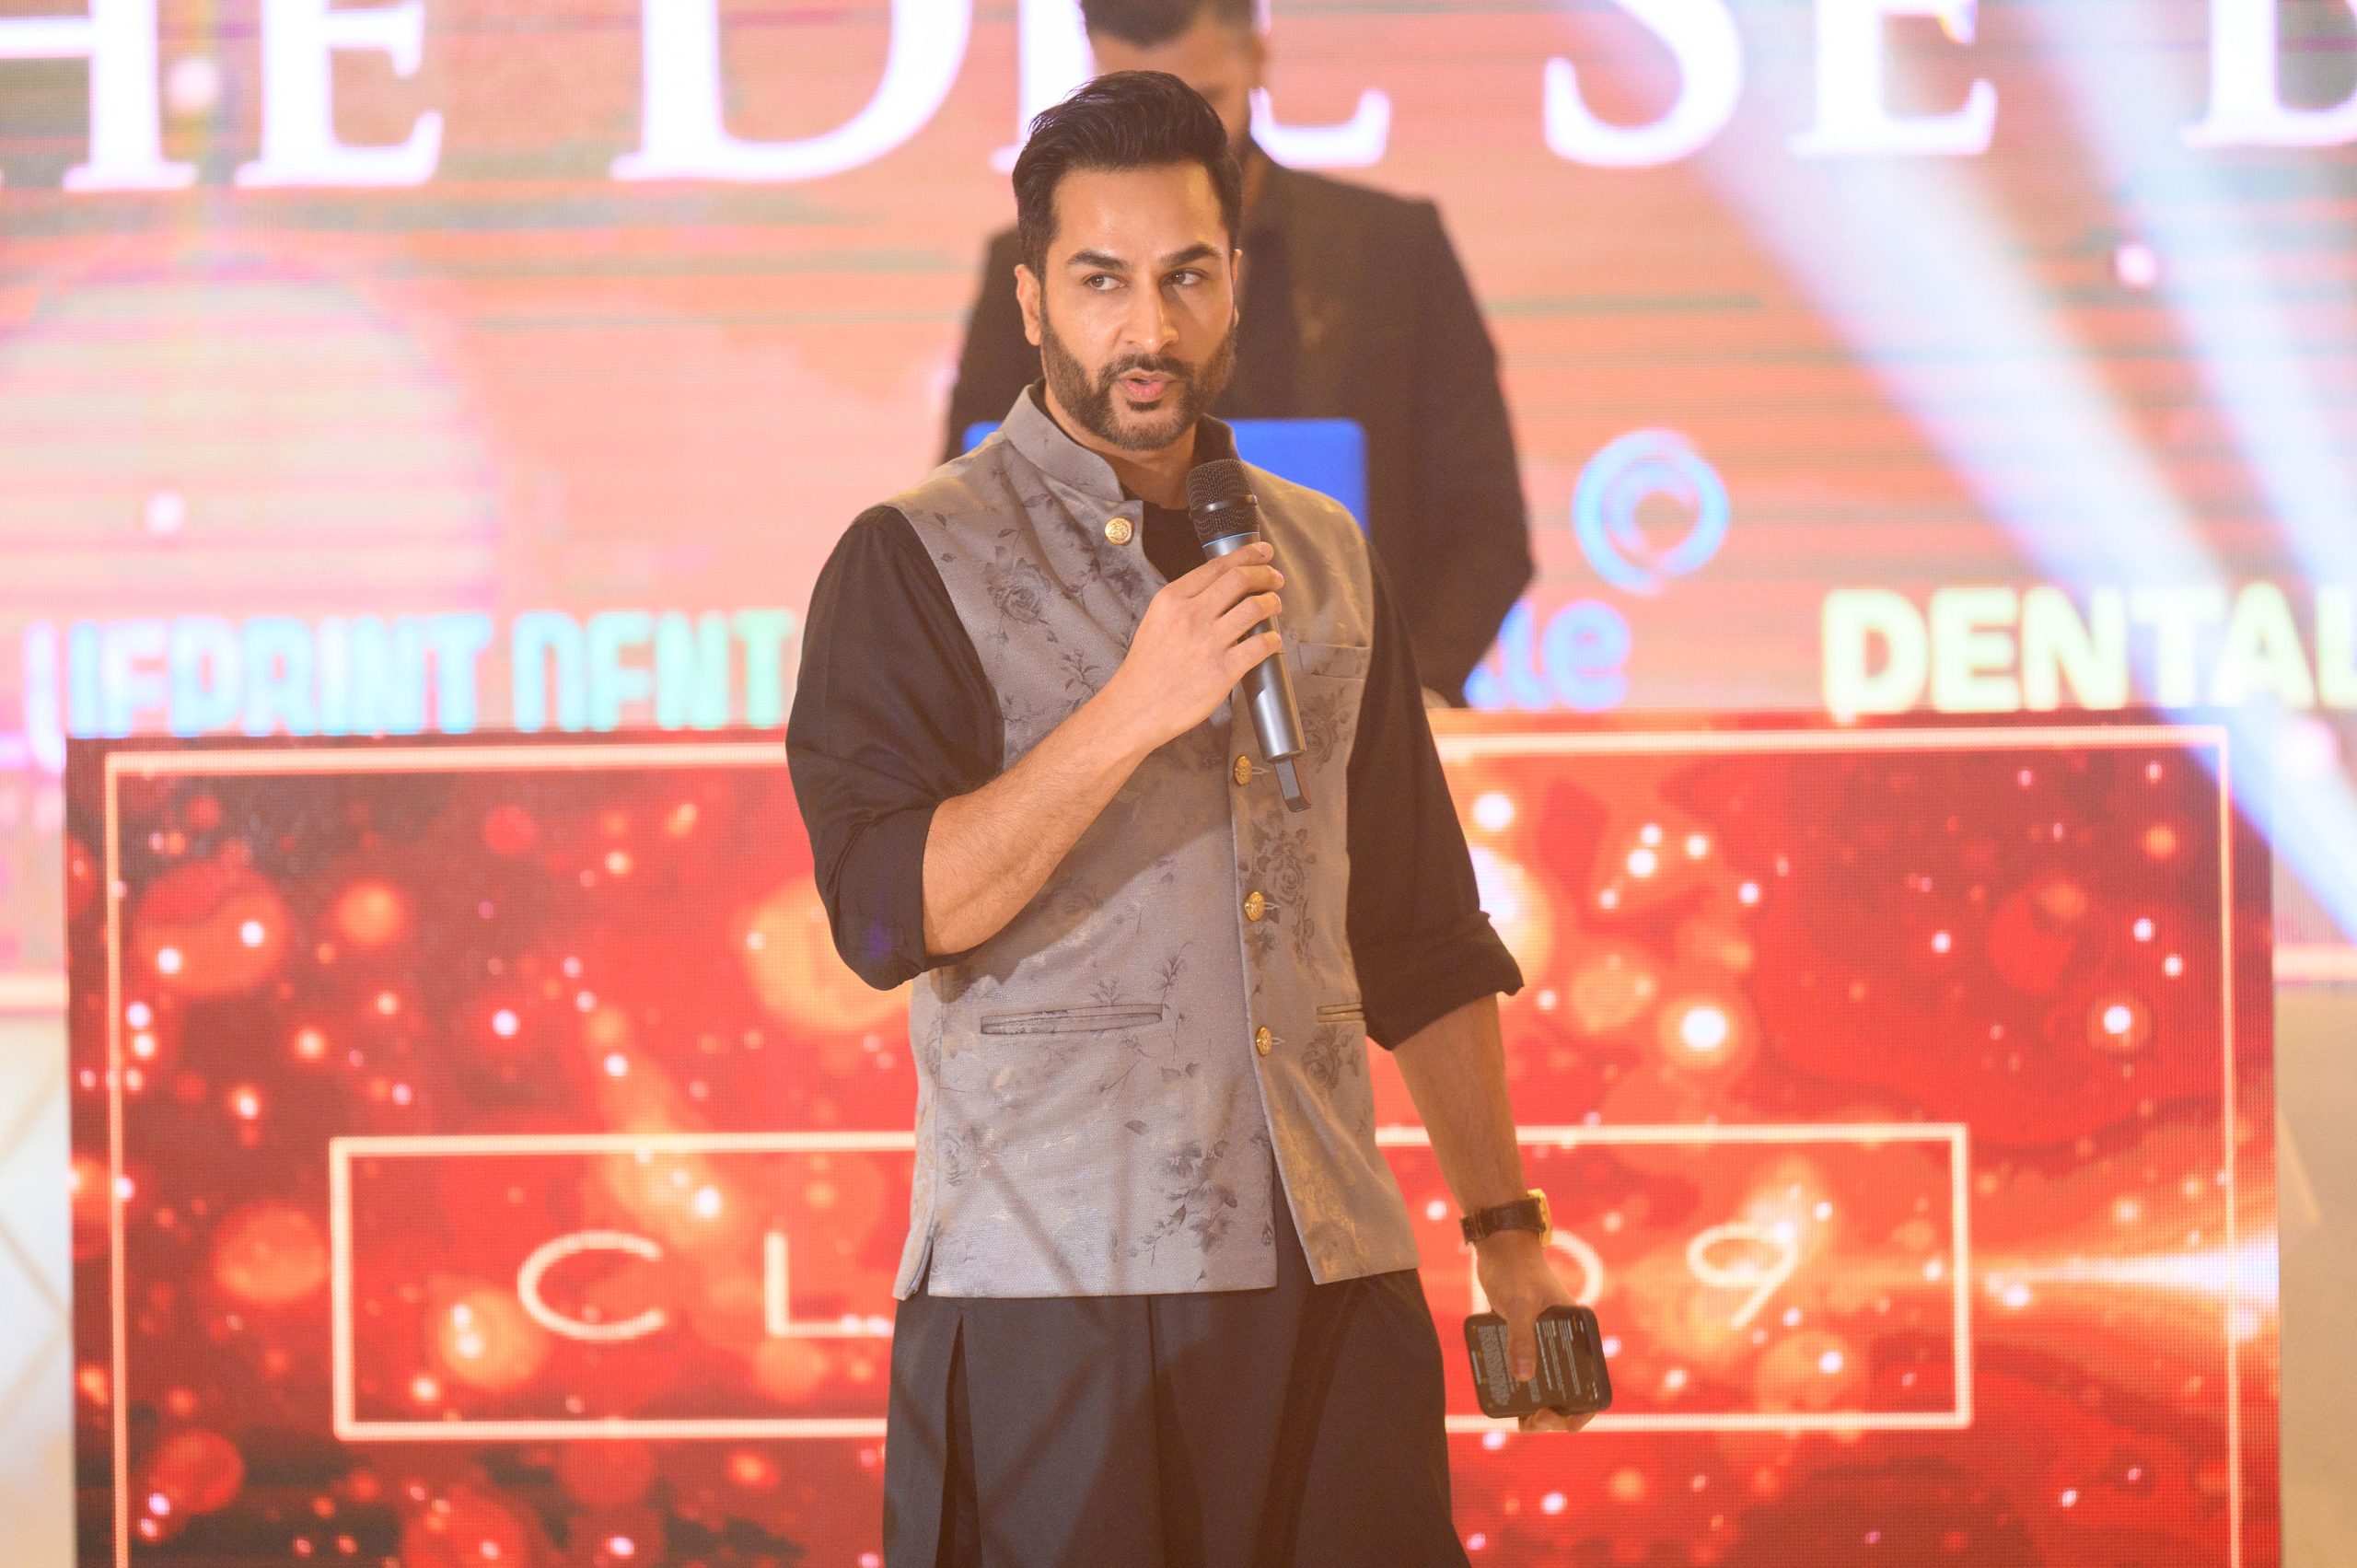 After the Dil Se Ball was a huge success, Jaswinder Gill discusses the story behind the event, what the evening entailed, and the charity it supported.